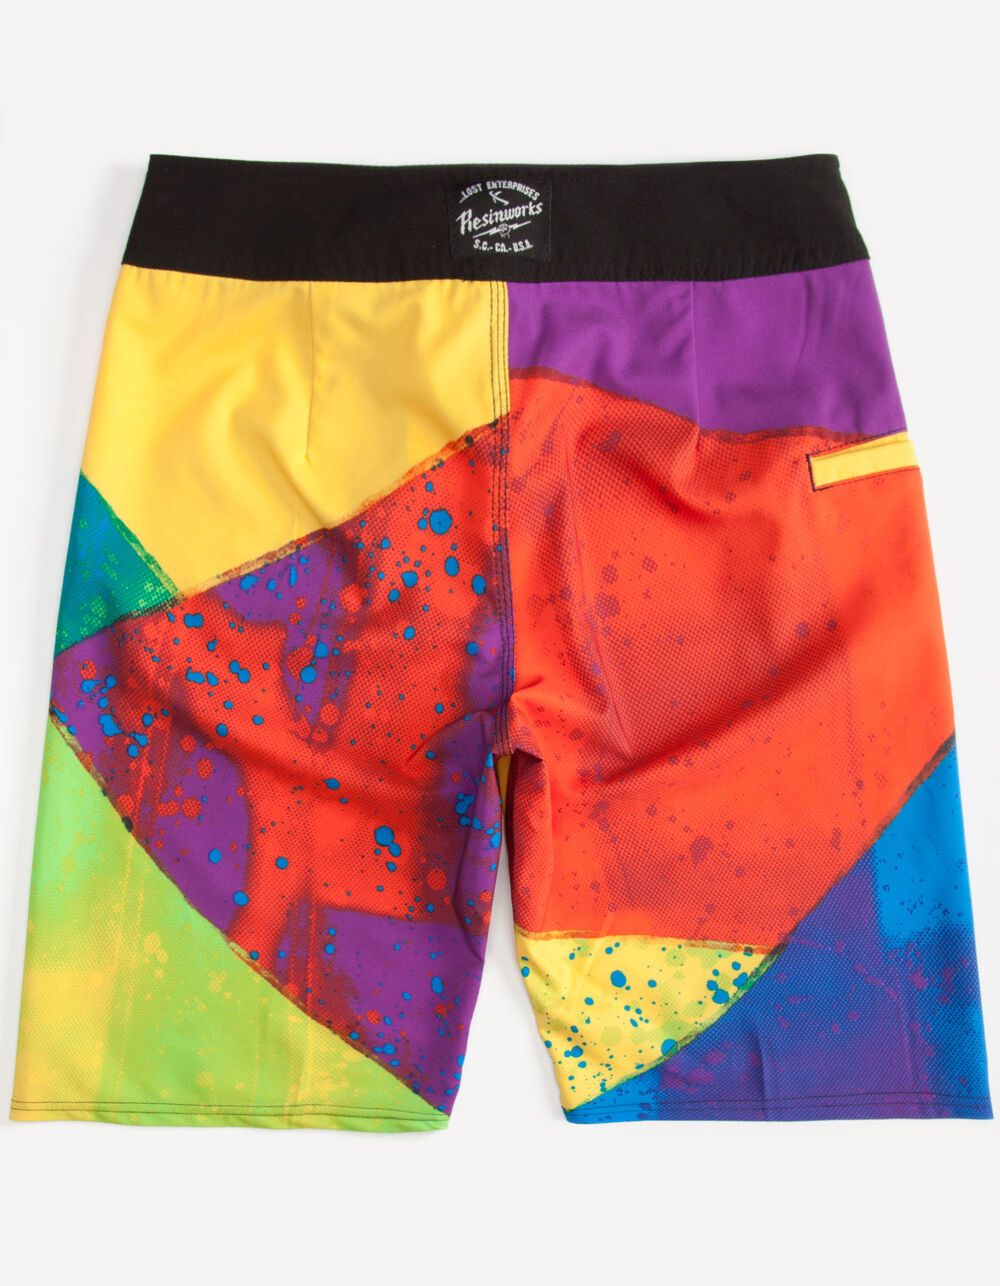 LOST Intersect Boys Boardshorts image number 1